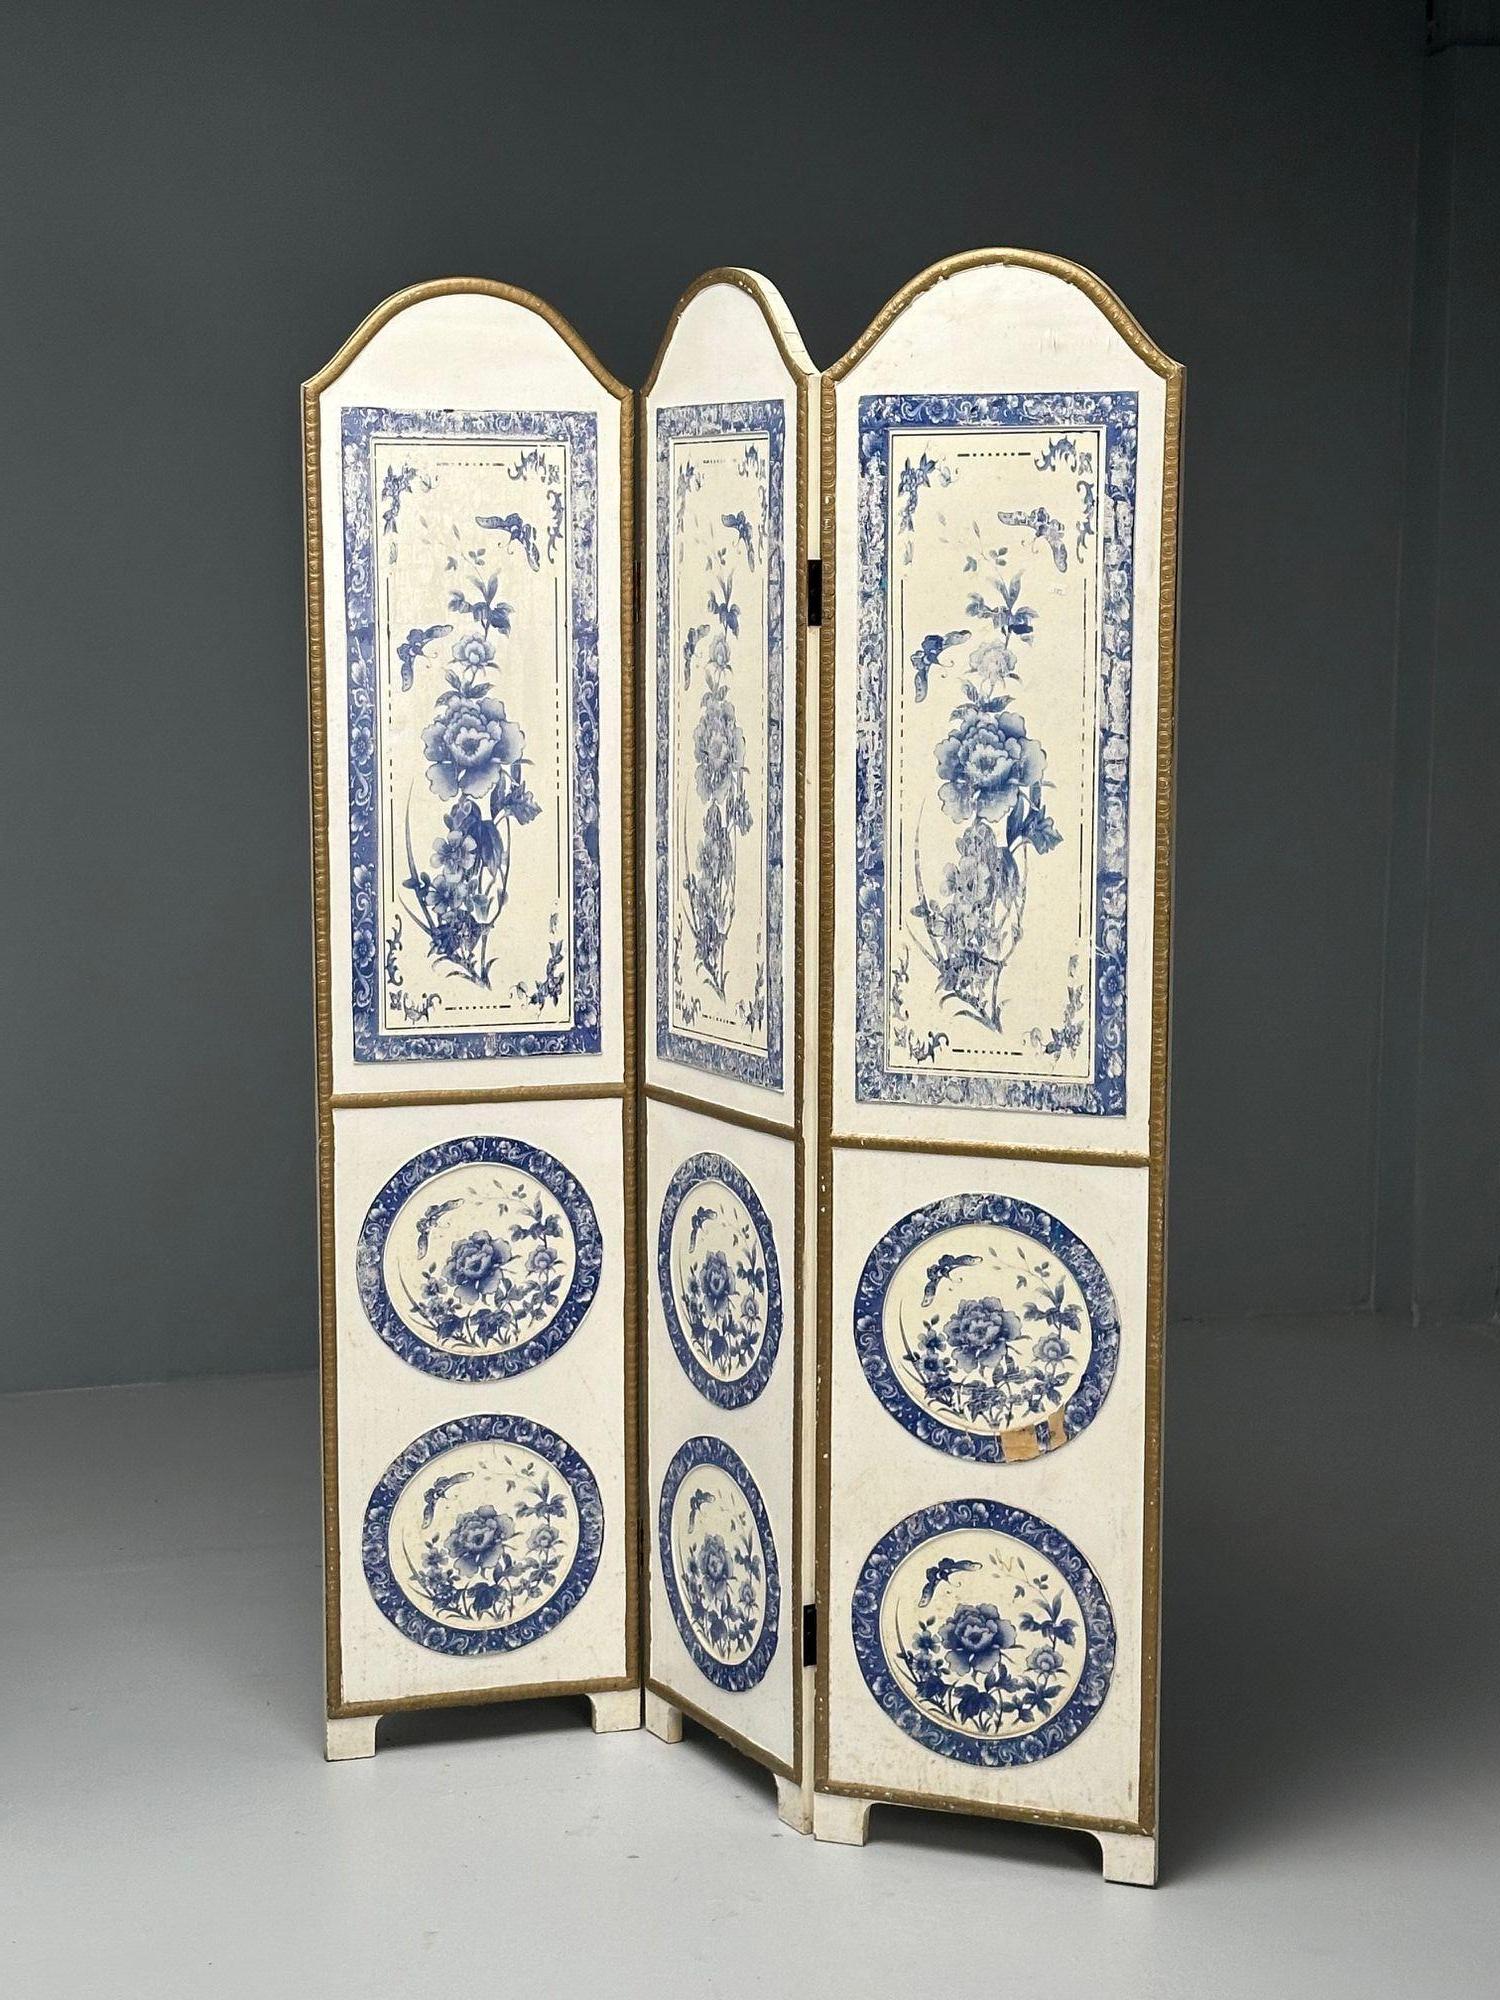 Italian, Chinoiserie, Room Dividers, Screens, Blue and White, Floral Motif, Gilt For Sale 1